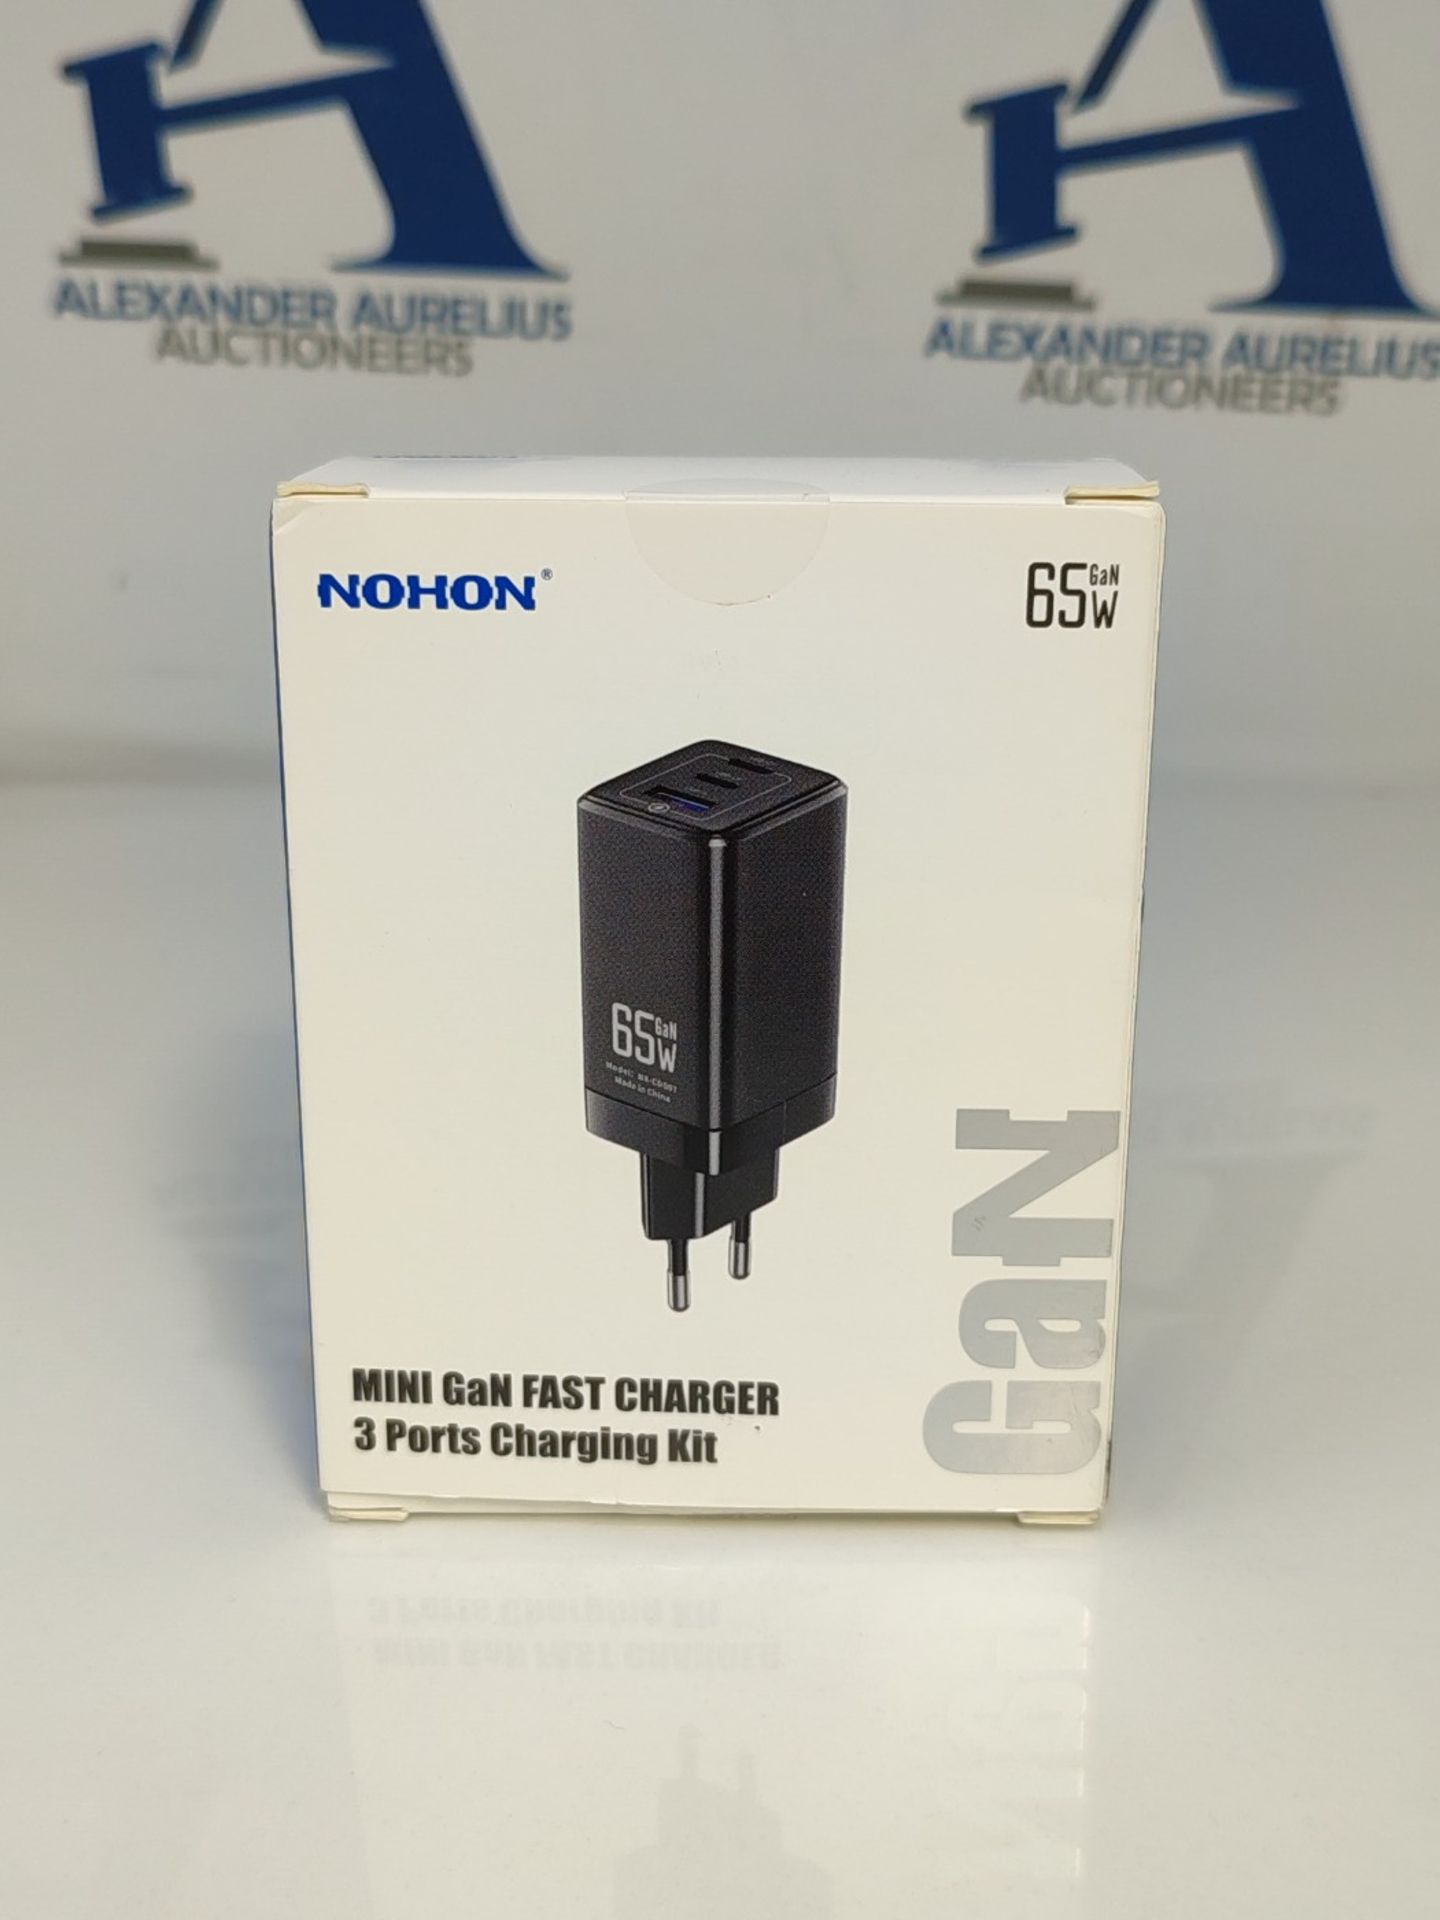 NOHON Quick USB-C Charger USB Plug: 65W GaN 3 Ports Ultra Charger PD3.0 with 140W USB - Image 2 of 3